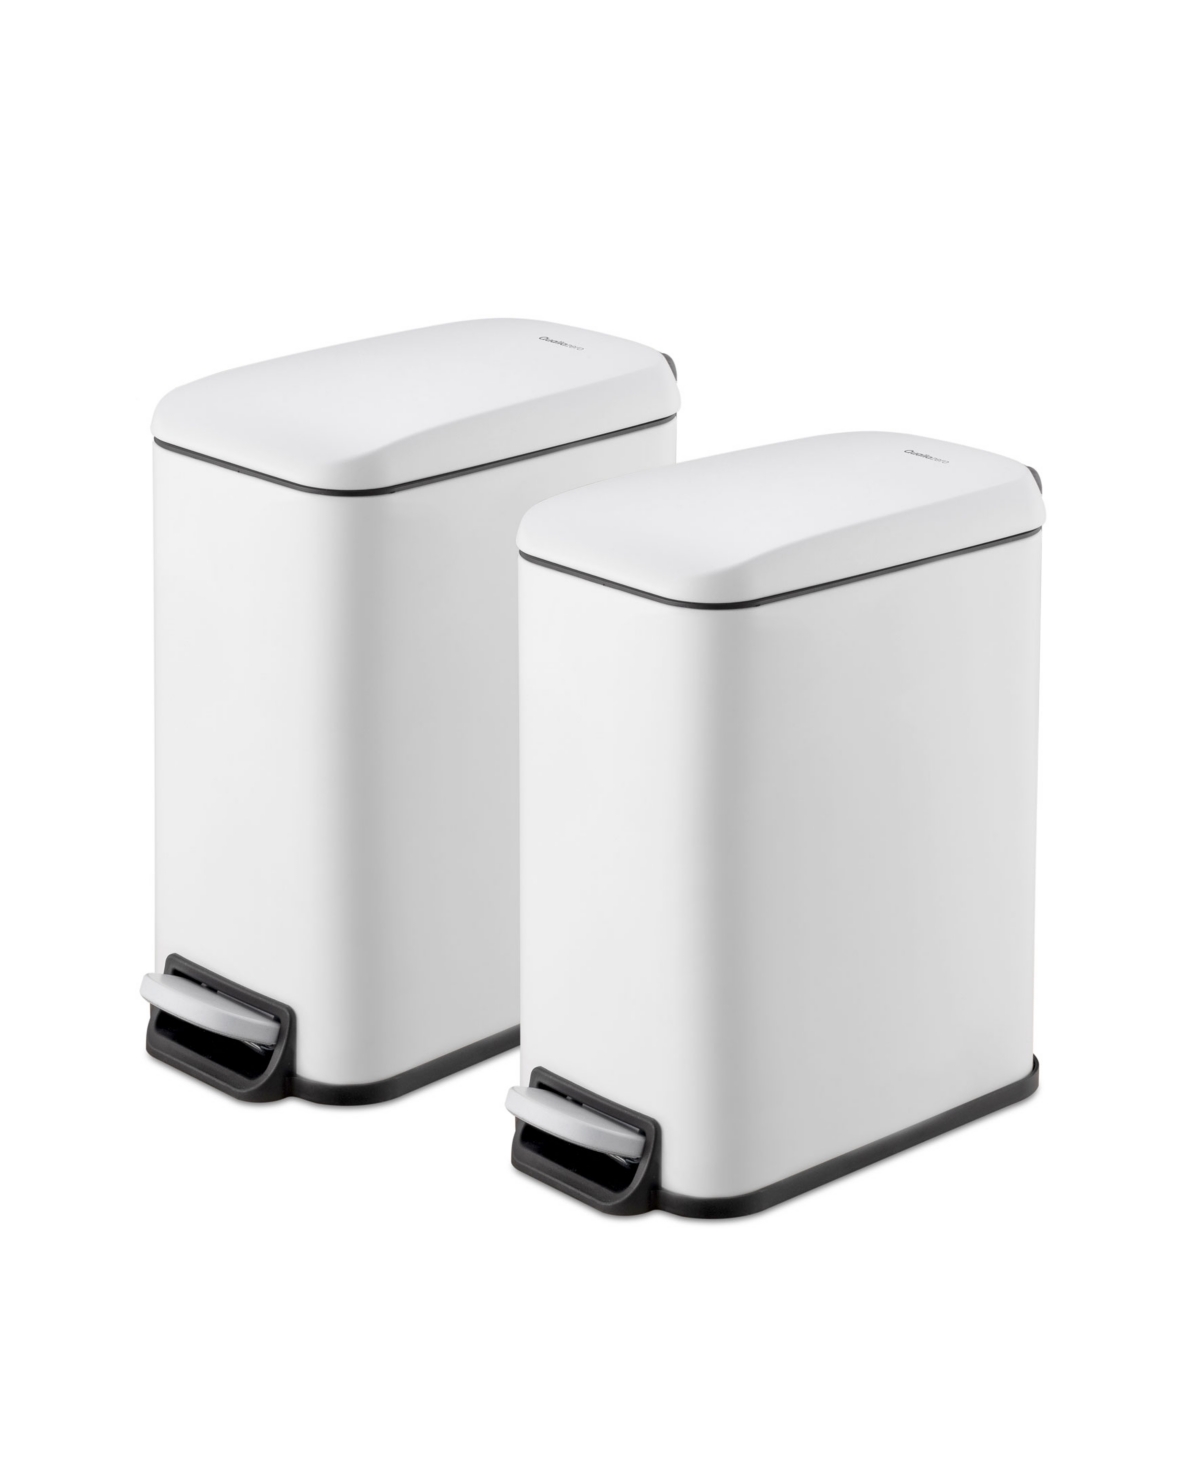 Two 1.3 Gallon Slim Step On Trash Can Set, 2 Pieces, Twin Pack - Matte White